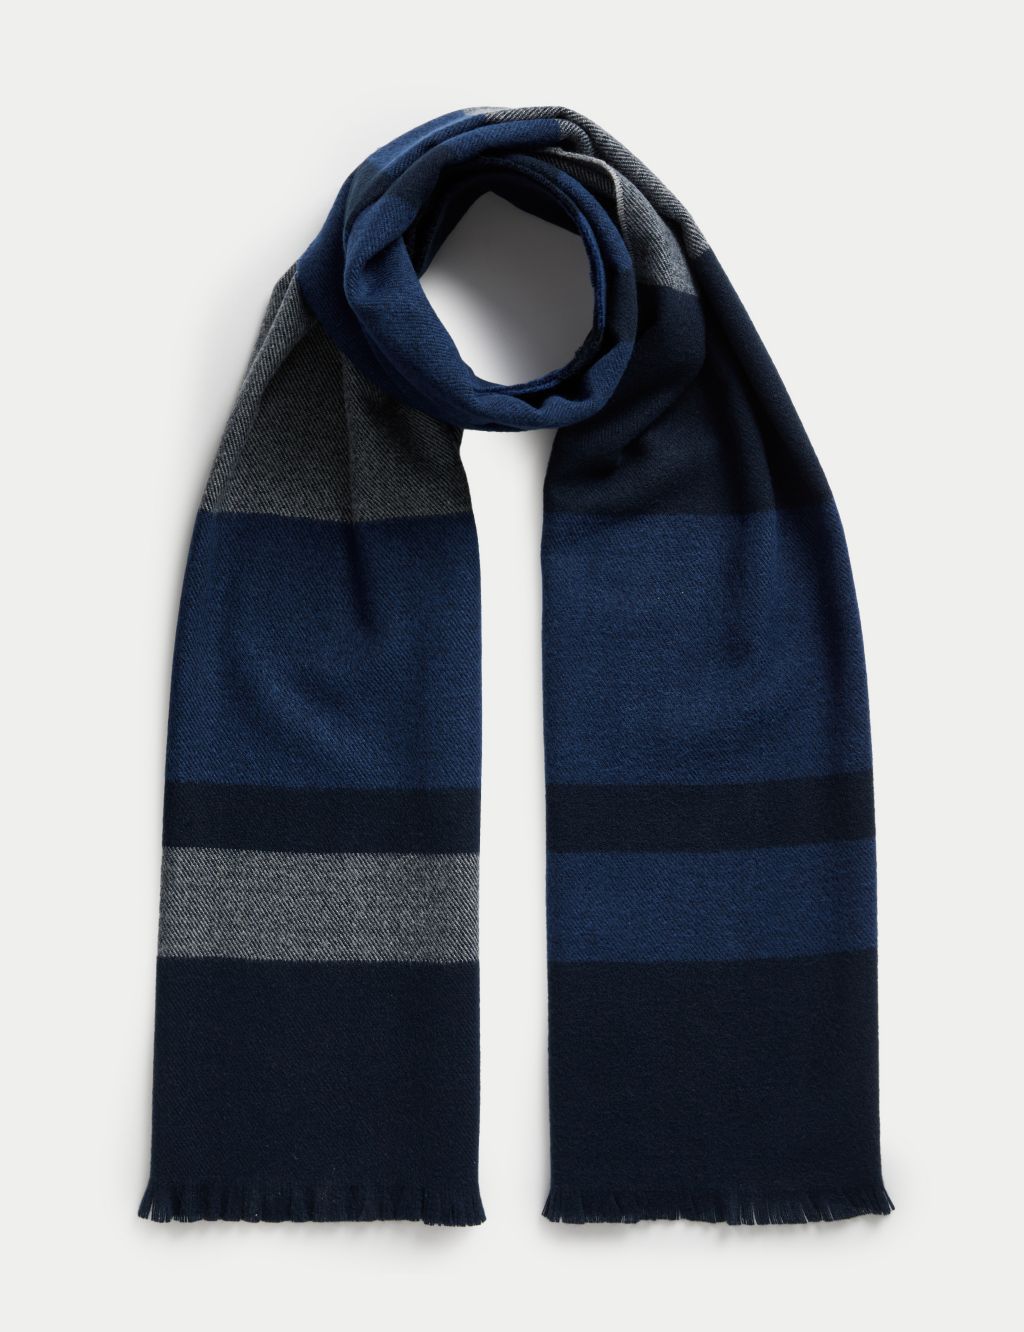 Striped Scarf image 1